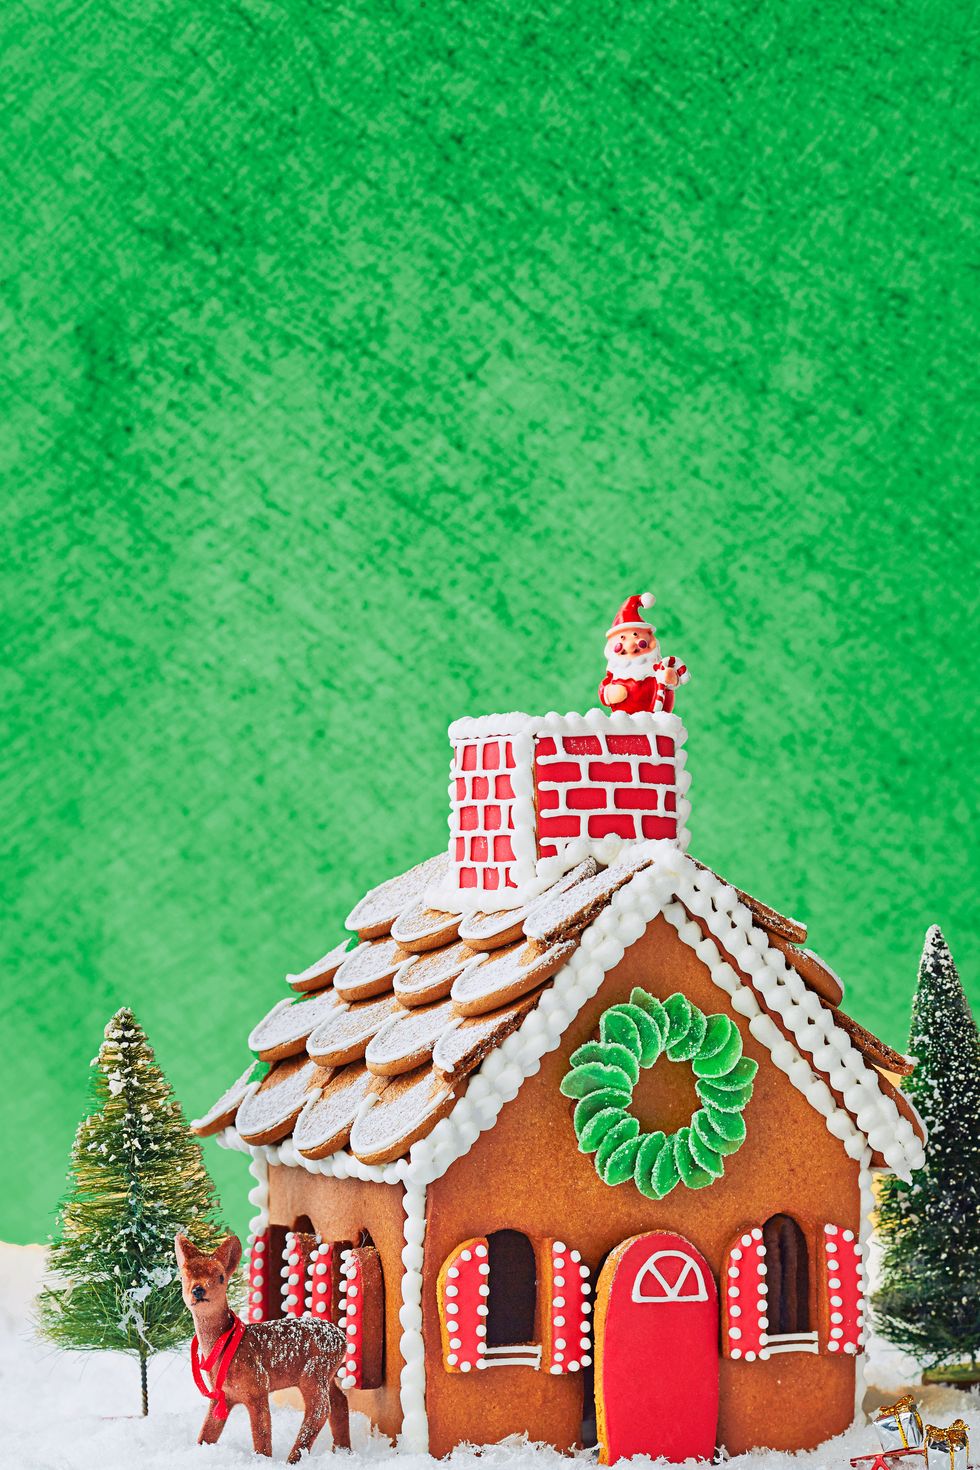 55 Best Gingerbread Houses - Pictures of Gingerbread House Design